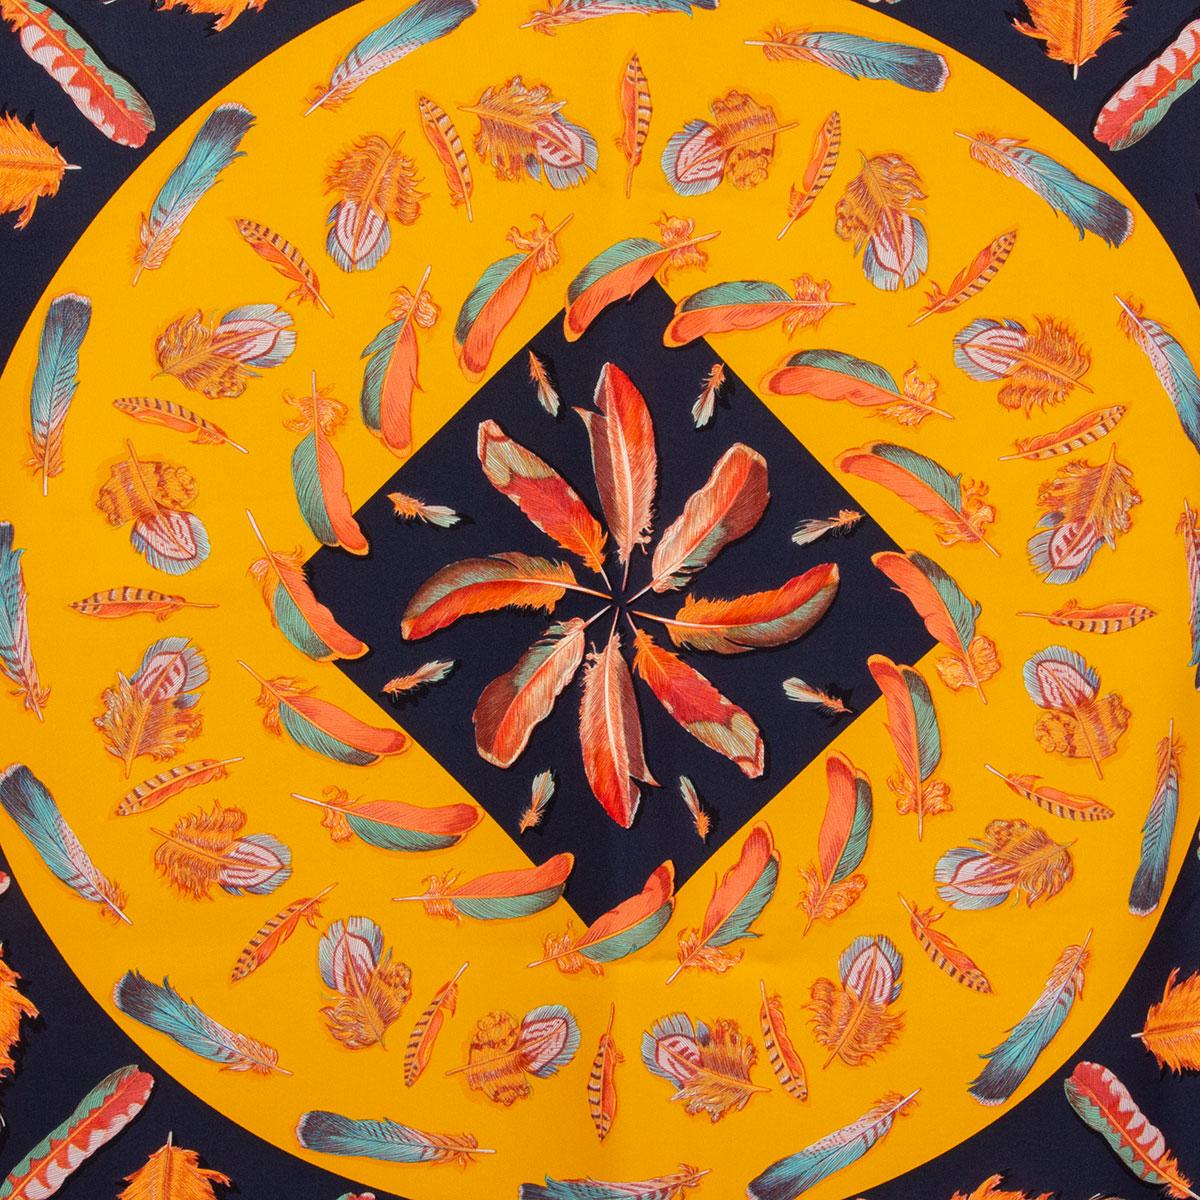 100% authentic Hermes 'Plumes ll 90' scarf by Henri de Linares in Marin (navy blue) silk twill (100%) with Capucine orange border and Jaune D'or (yellow) center. Feather print in orange, red, blue and green. Has been worn and is in excellent